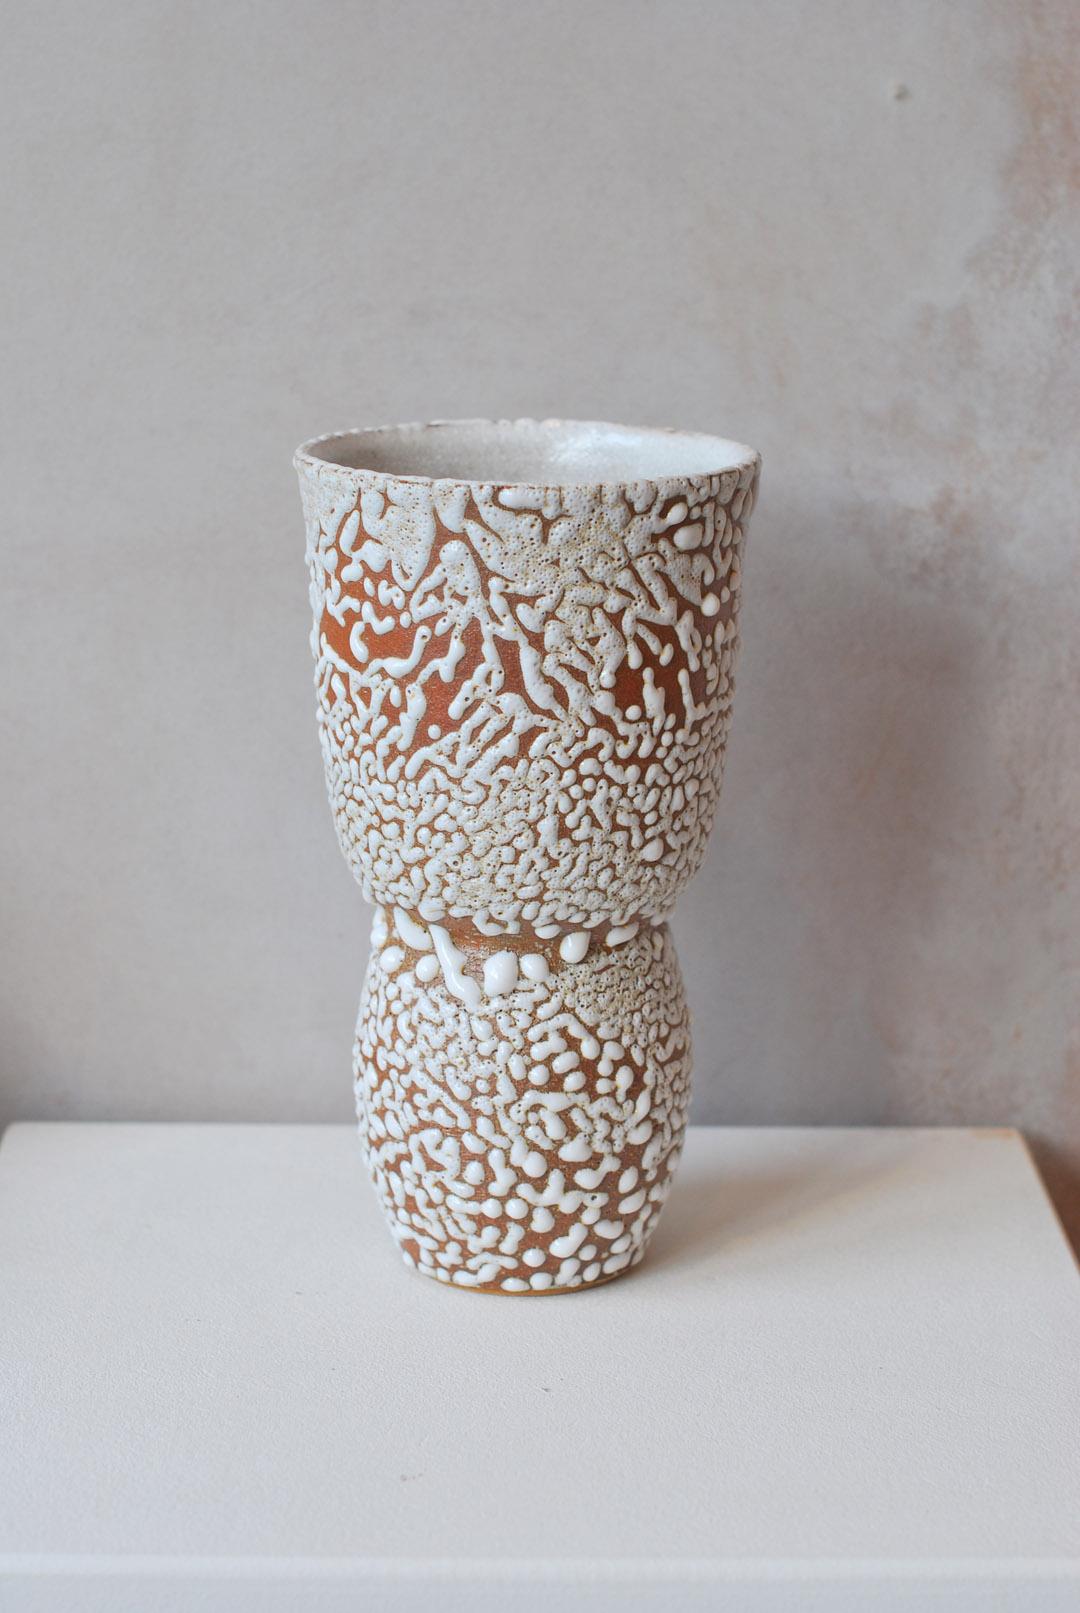 Set of 3 White Stoneware Vases C-019, C0-15, C-018 by Moïo Studio In New Condition For Sale In Geneve, CH